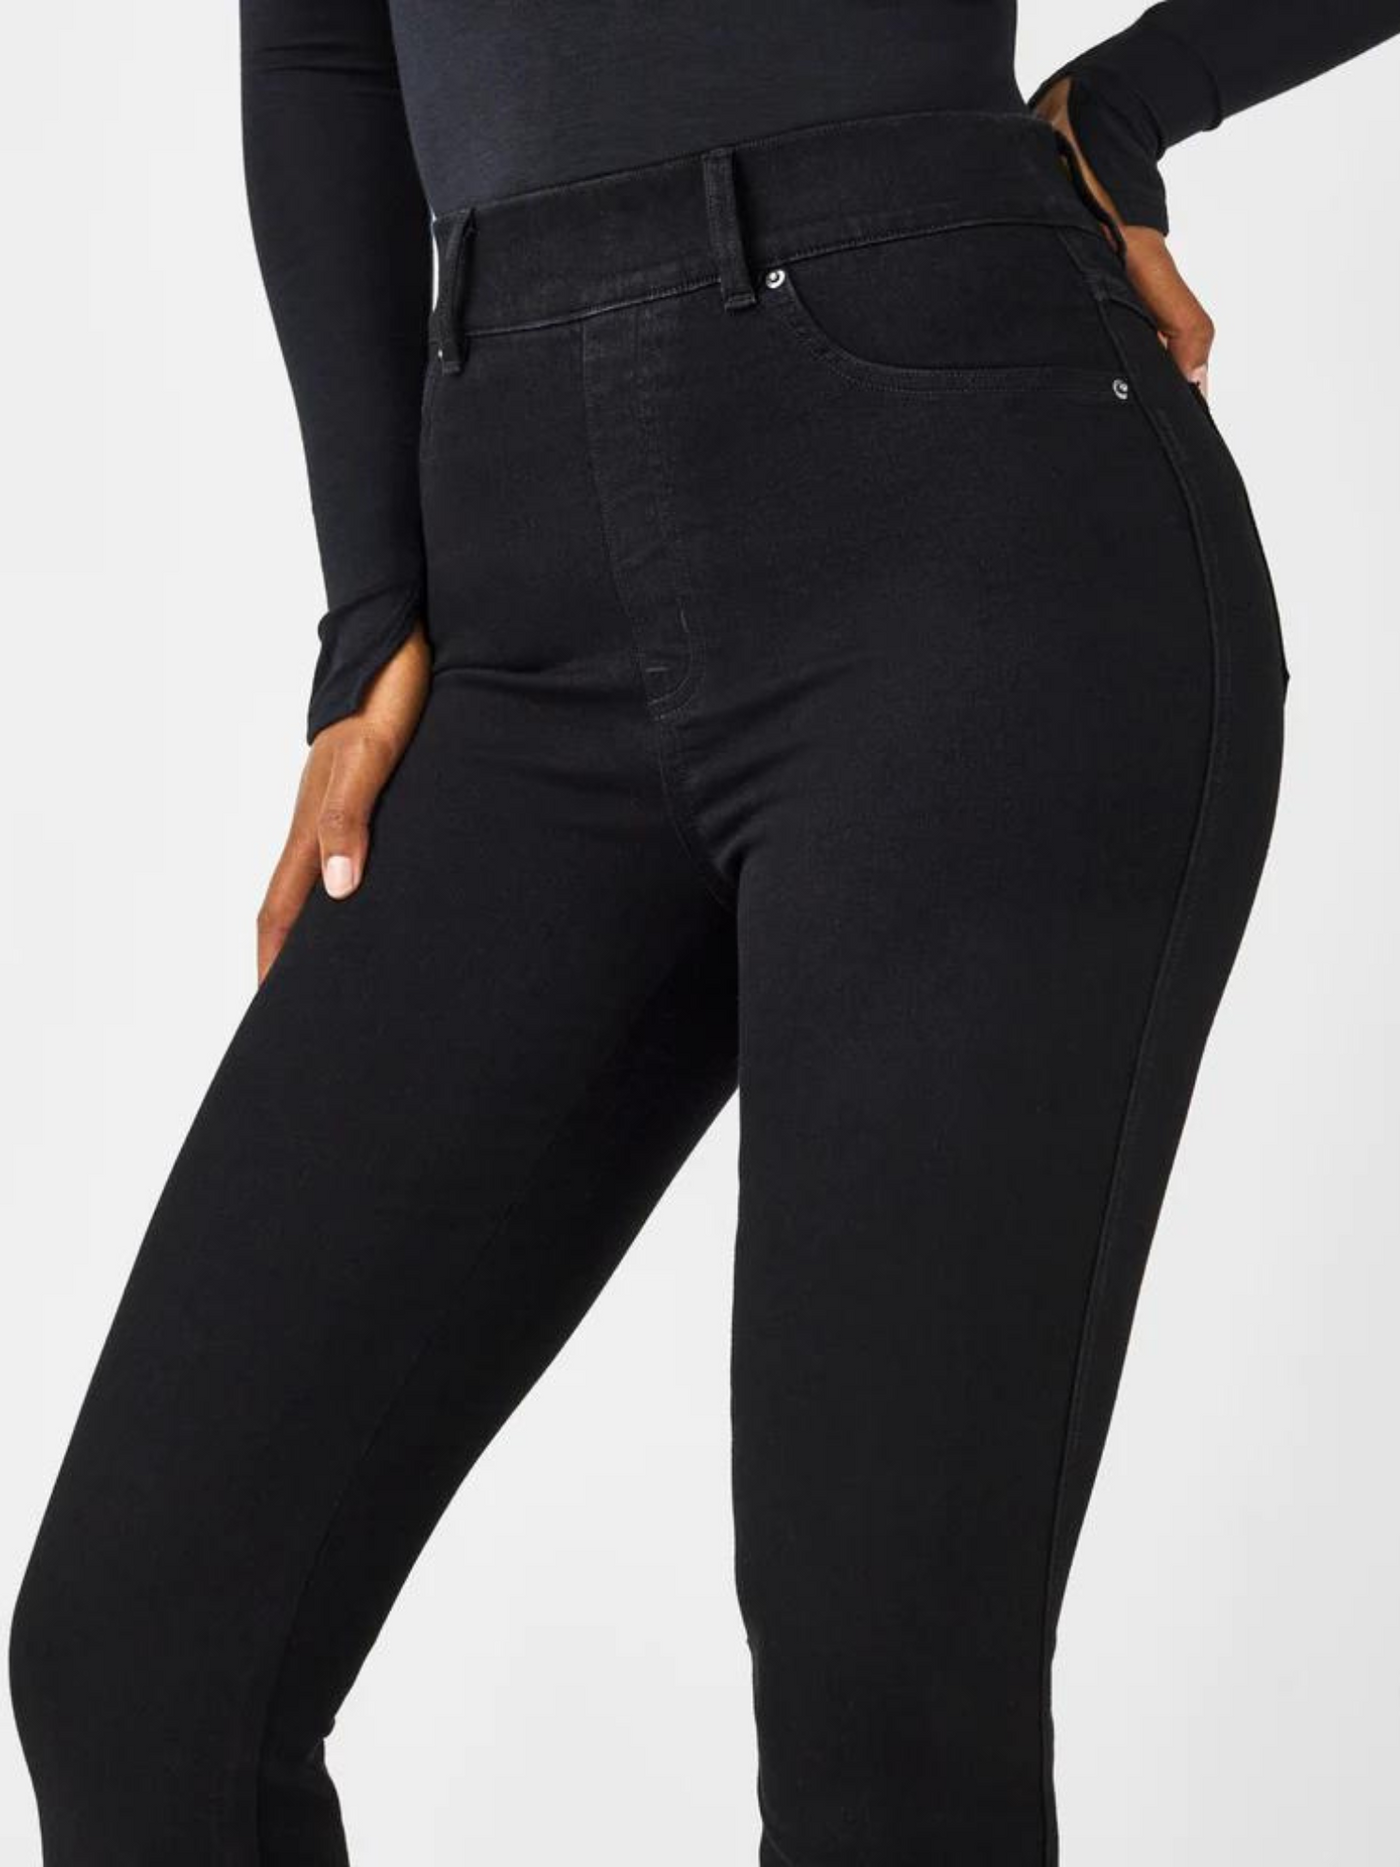 Spanx Black Flare Jeans up close front view.